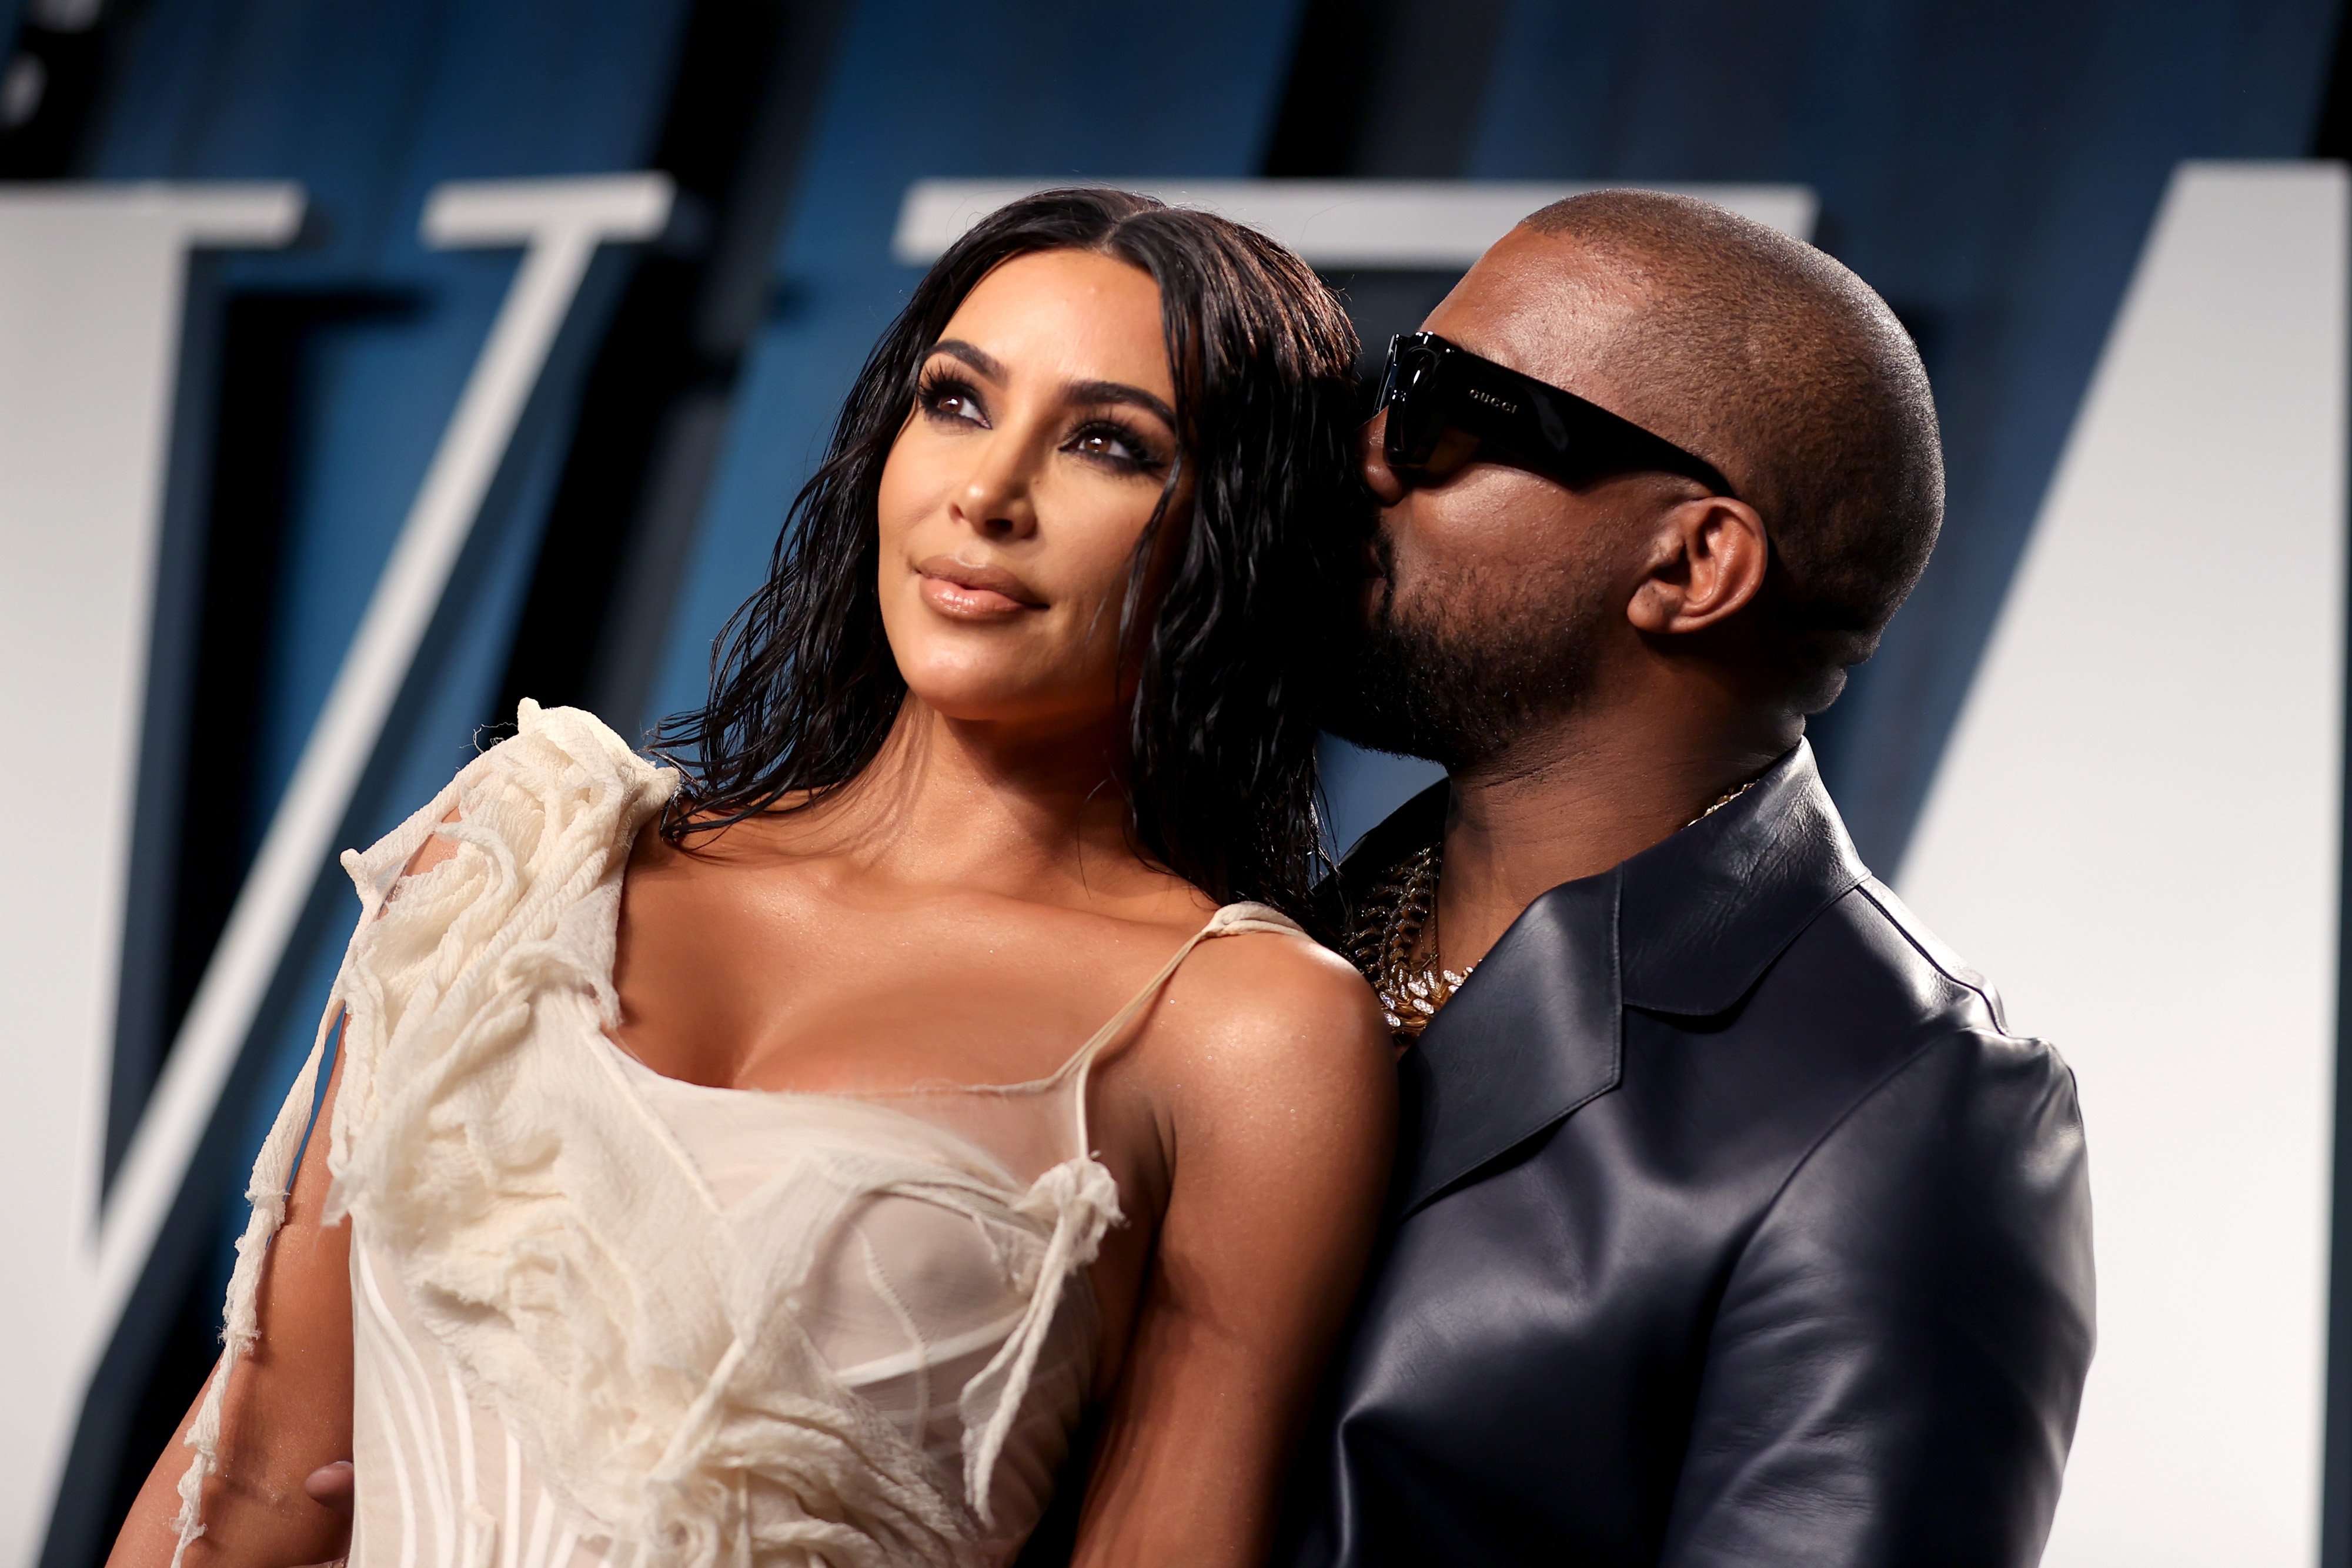 Why Fans Aren’t Buying the Kim Kardashian West and Kanye West Divorce Rumors